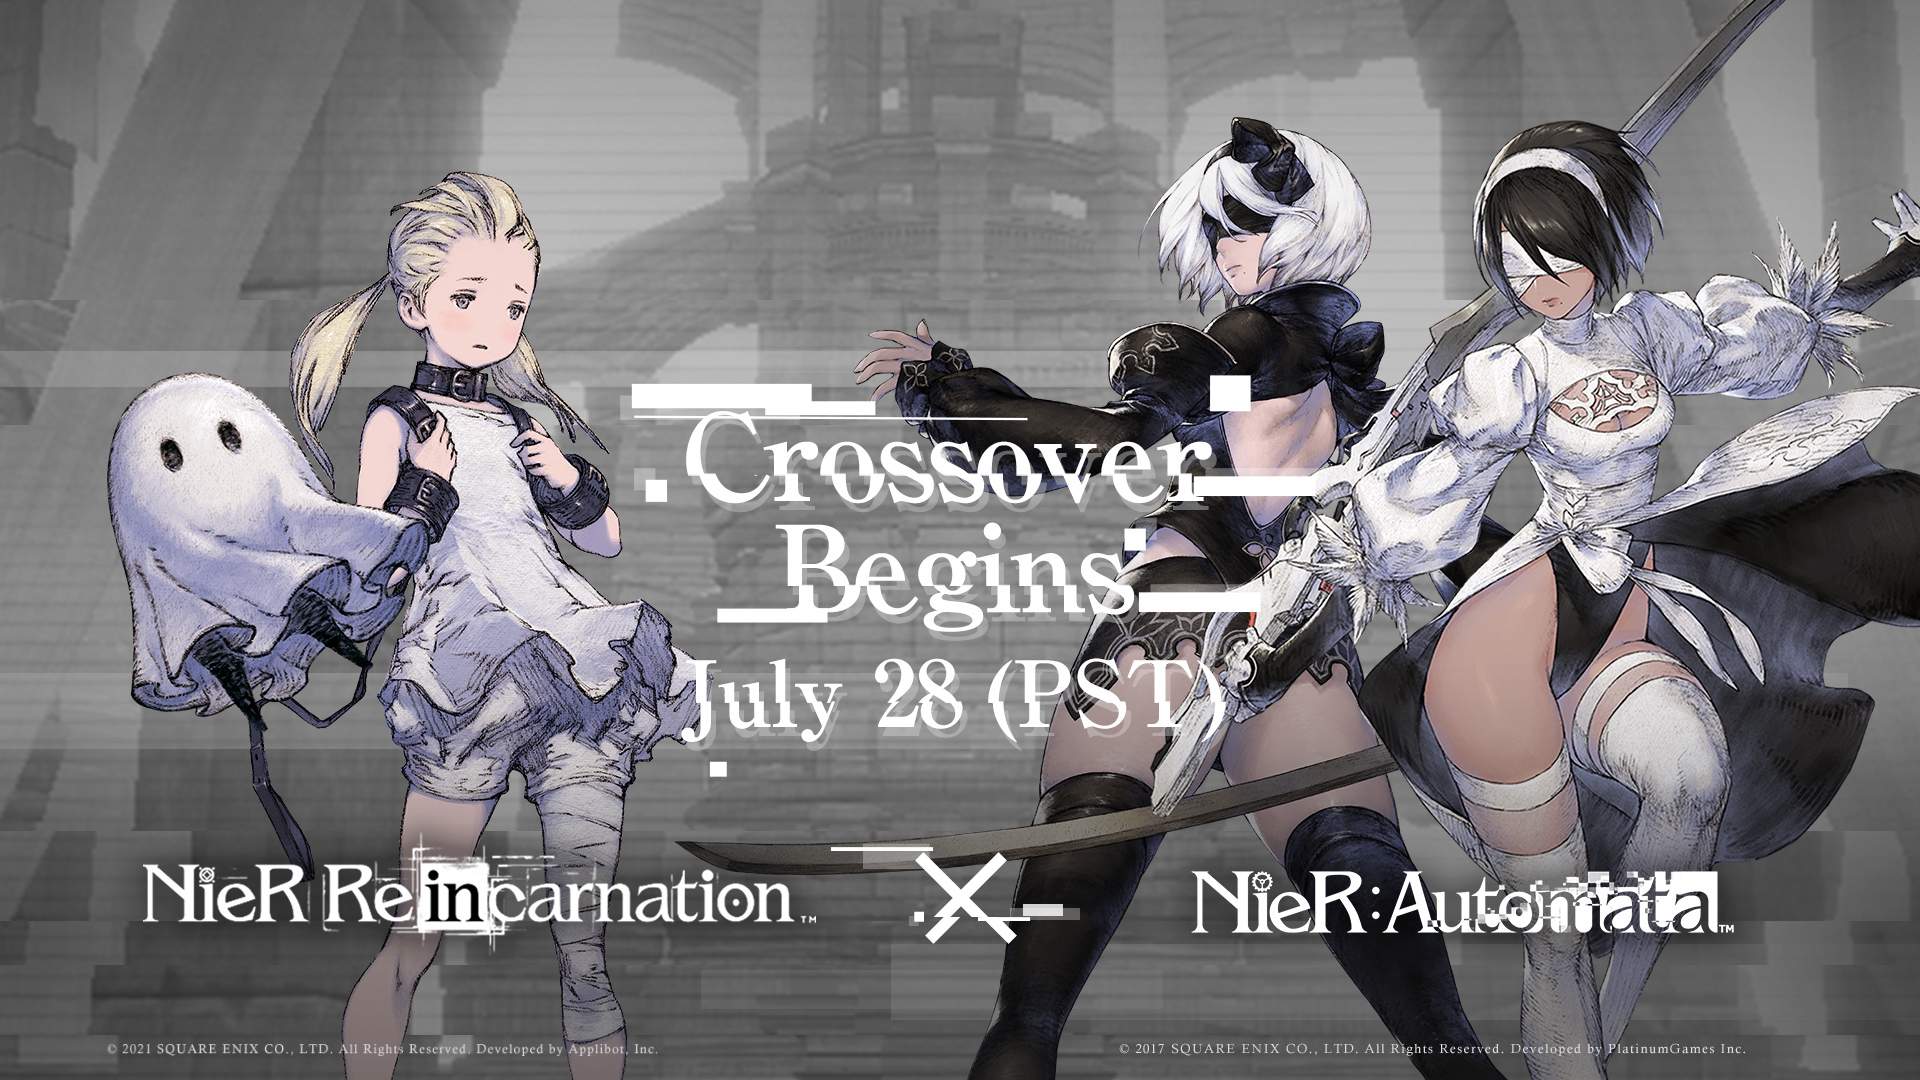 Nier Reincarnation Is Crossing Over With Final Fantasy XIV - GameSpot